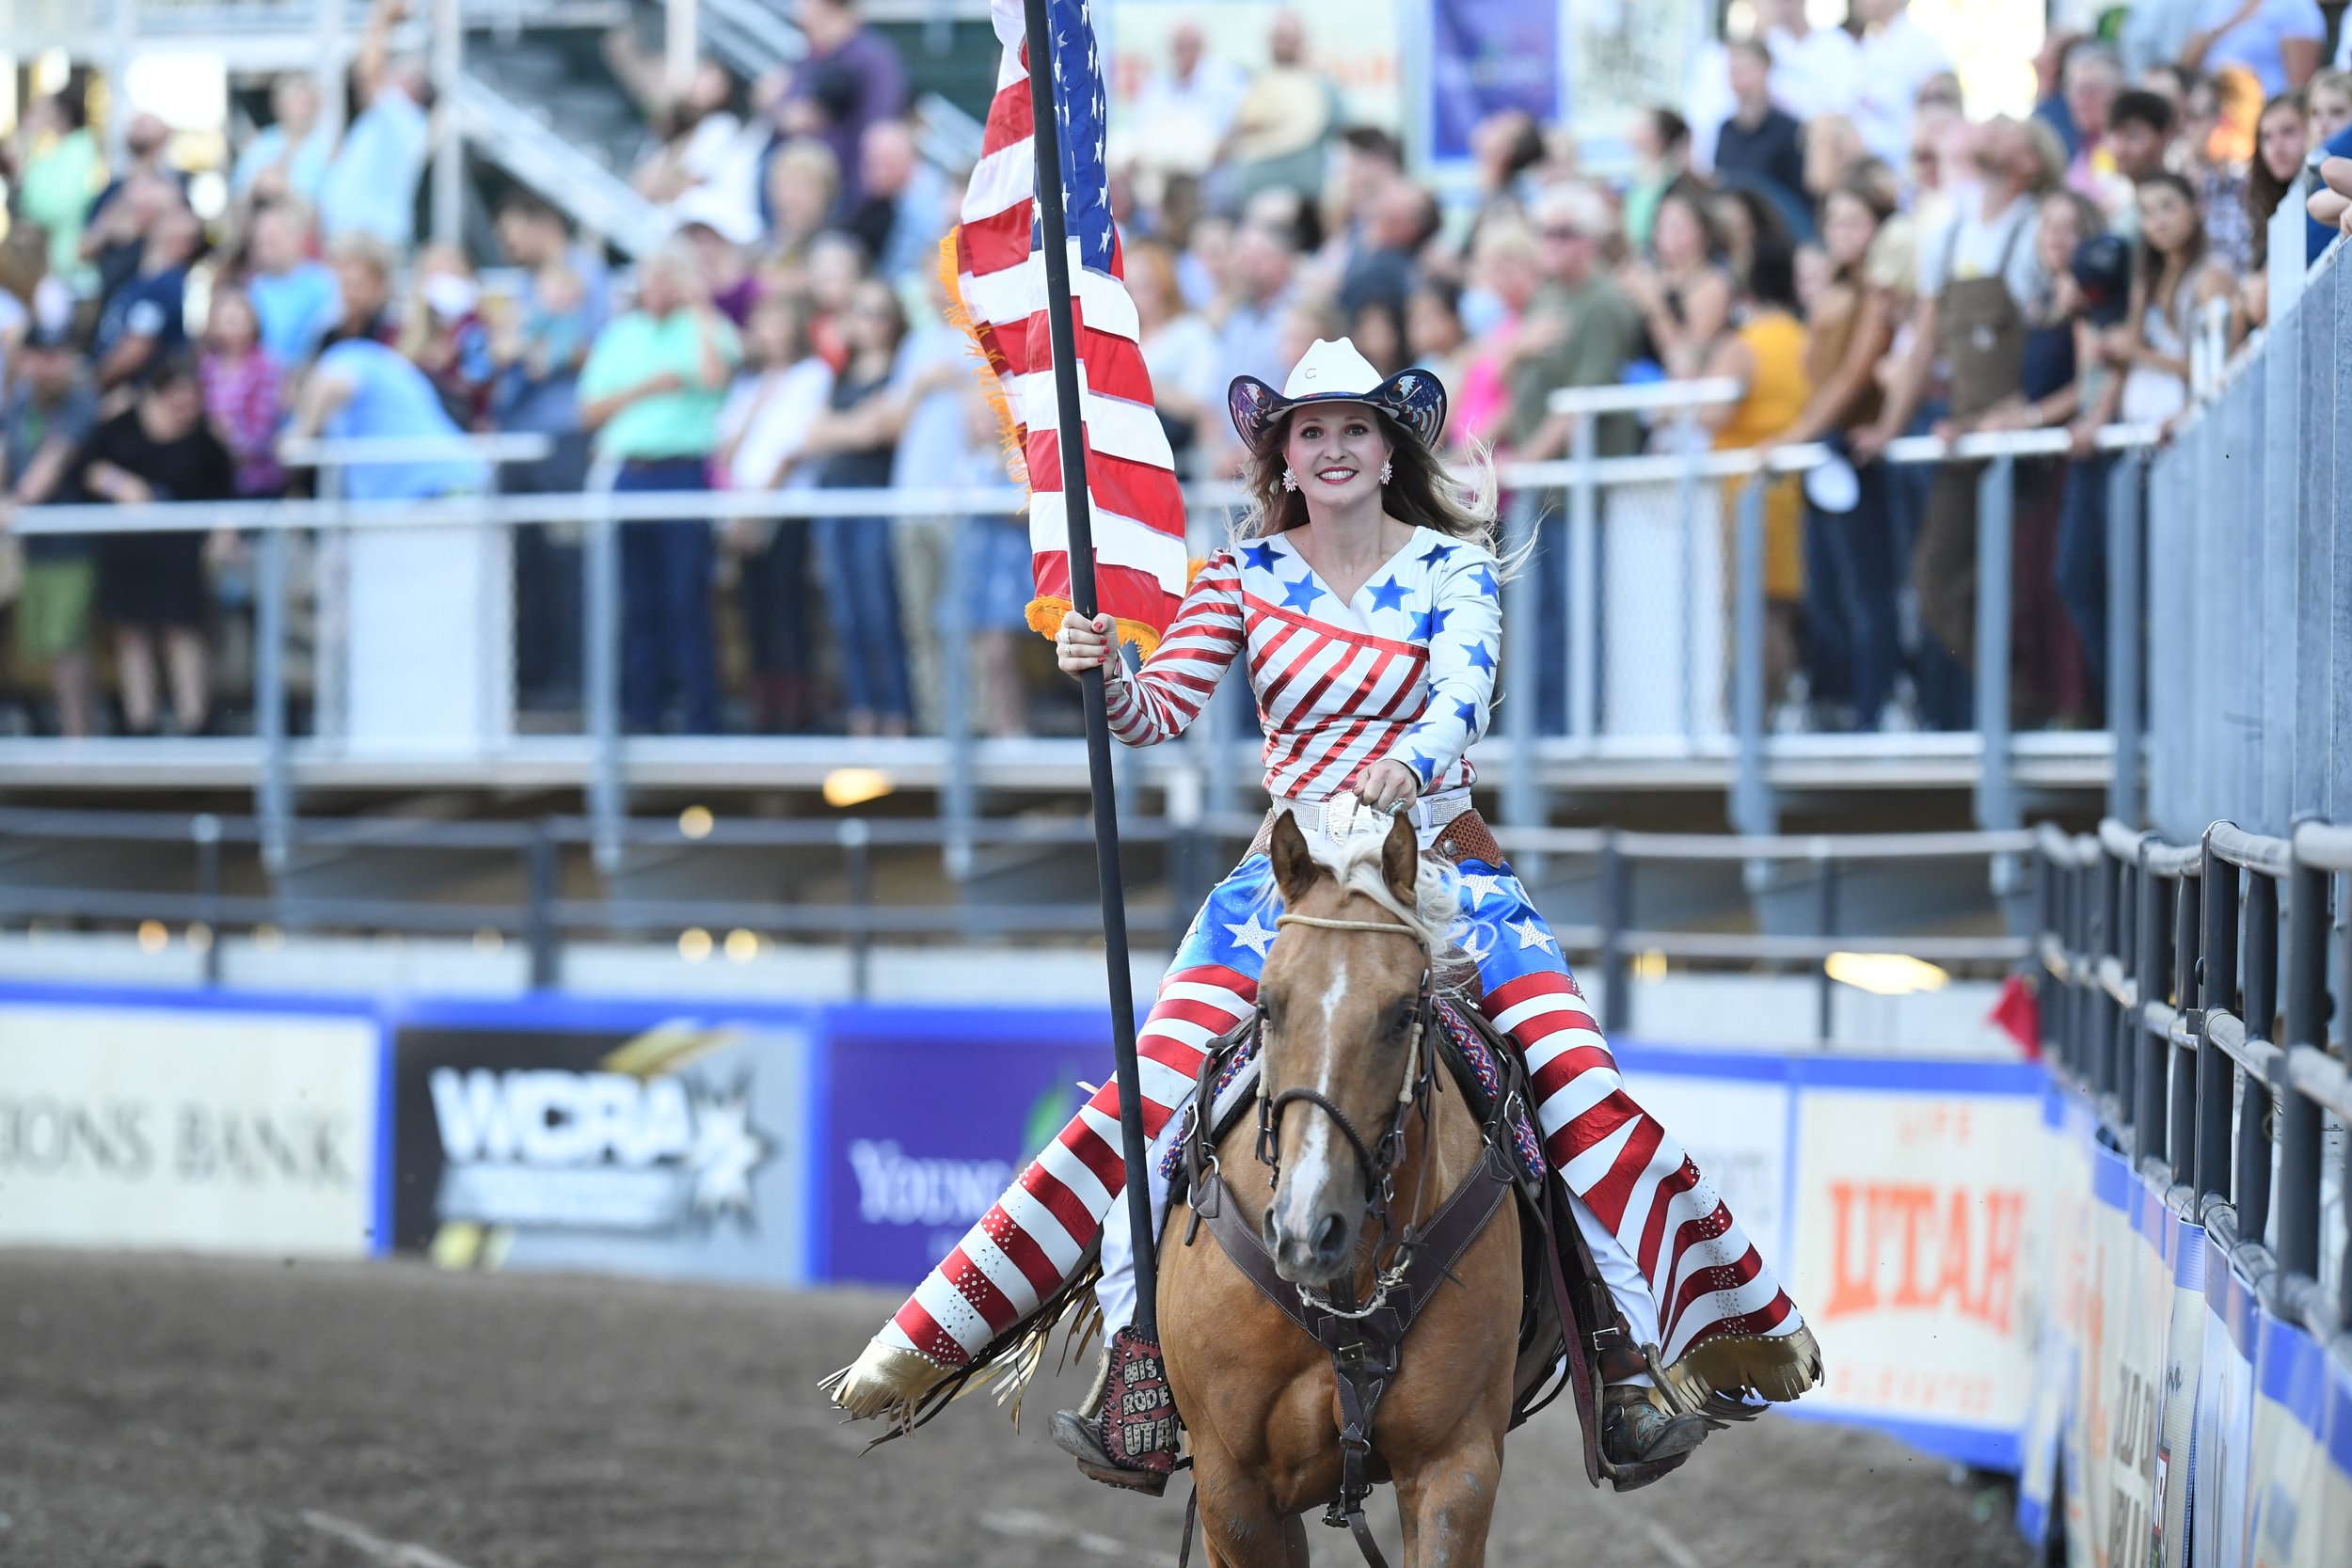 SCHEDULE — Utah Days of 47 Rodeo State of Utah’s official rodeo